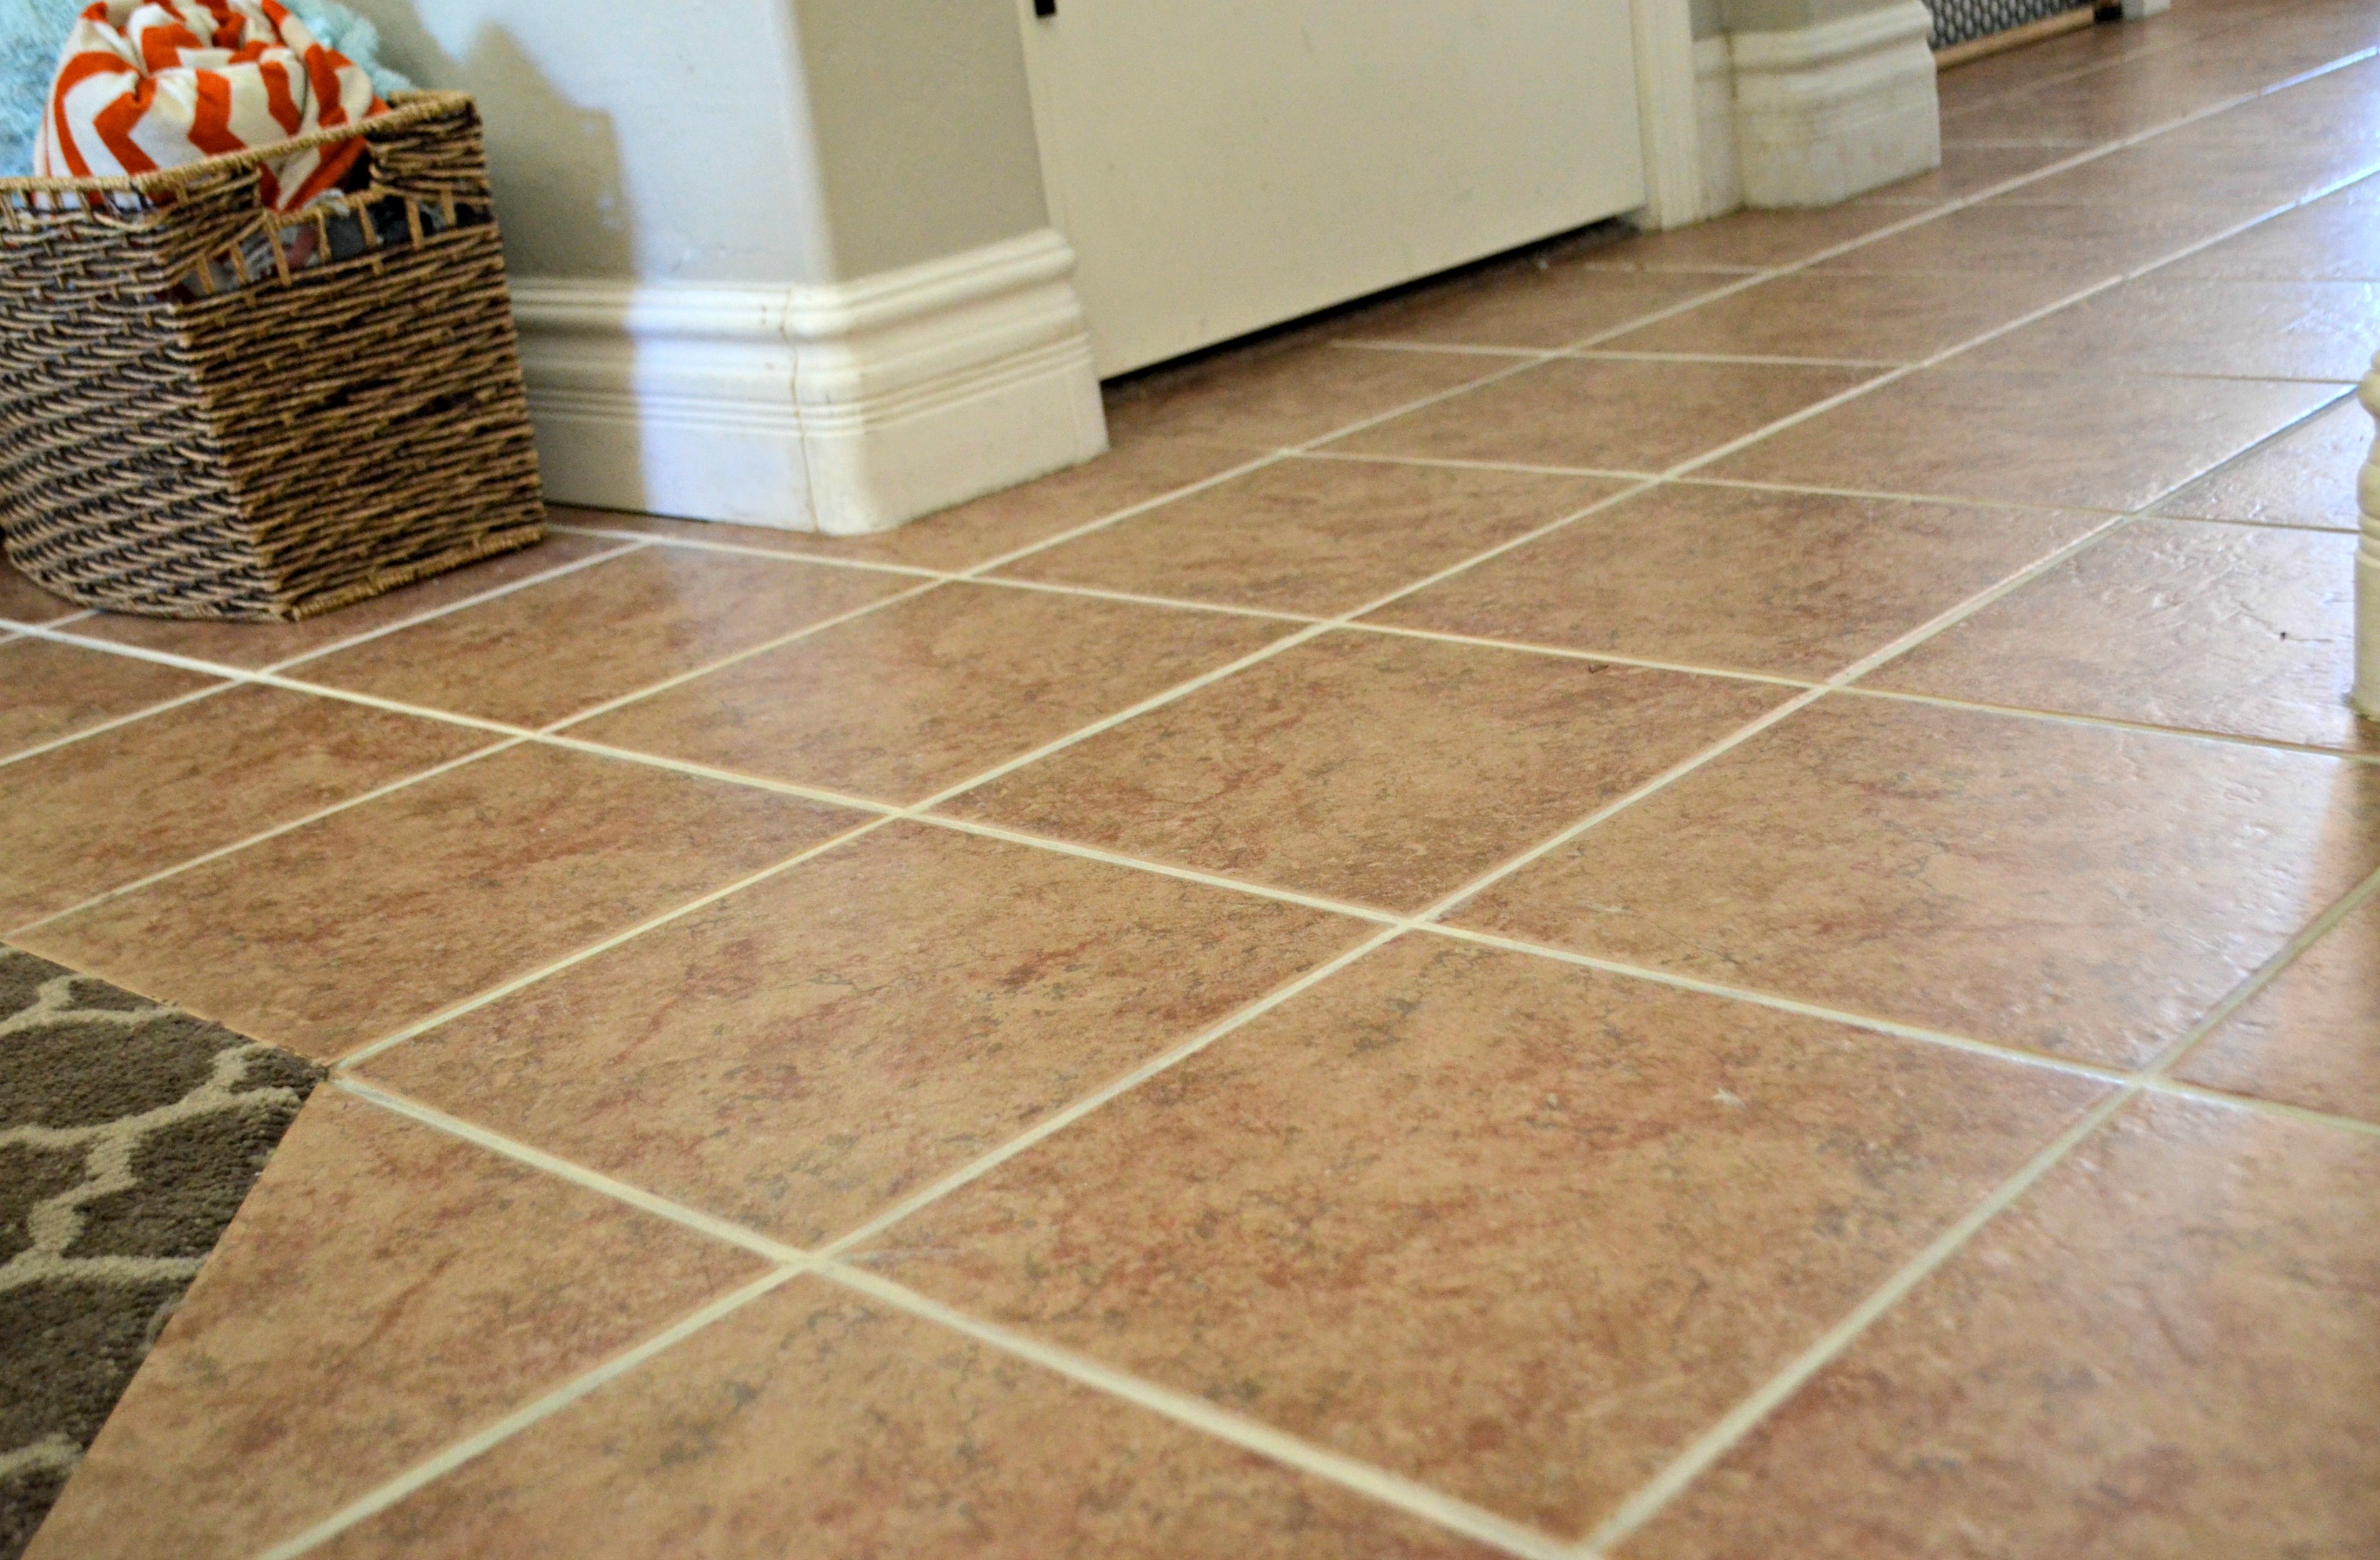 closeup of the tile floor after cleaning the grout